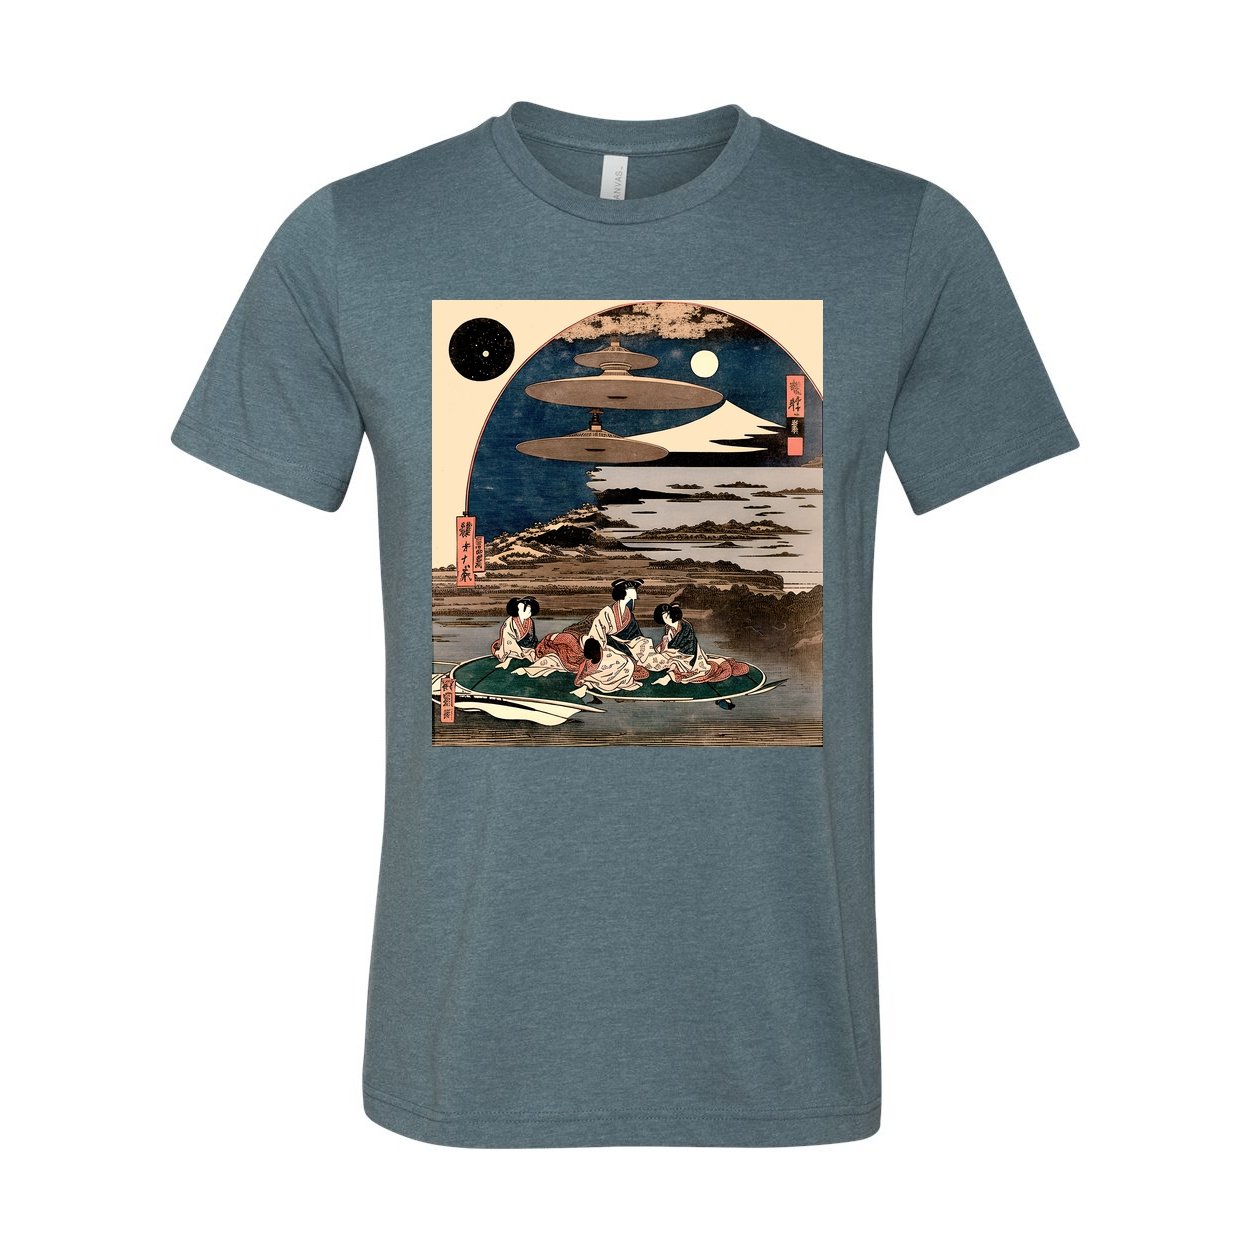 T-Shirts XS / Heather Slate UFO Space Alien Invasion | Extraterrestrial Vintage Ukiyo-e 19th-Century Surreal Graphic Art T-Shirt